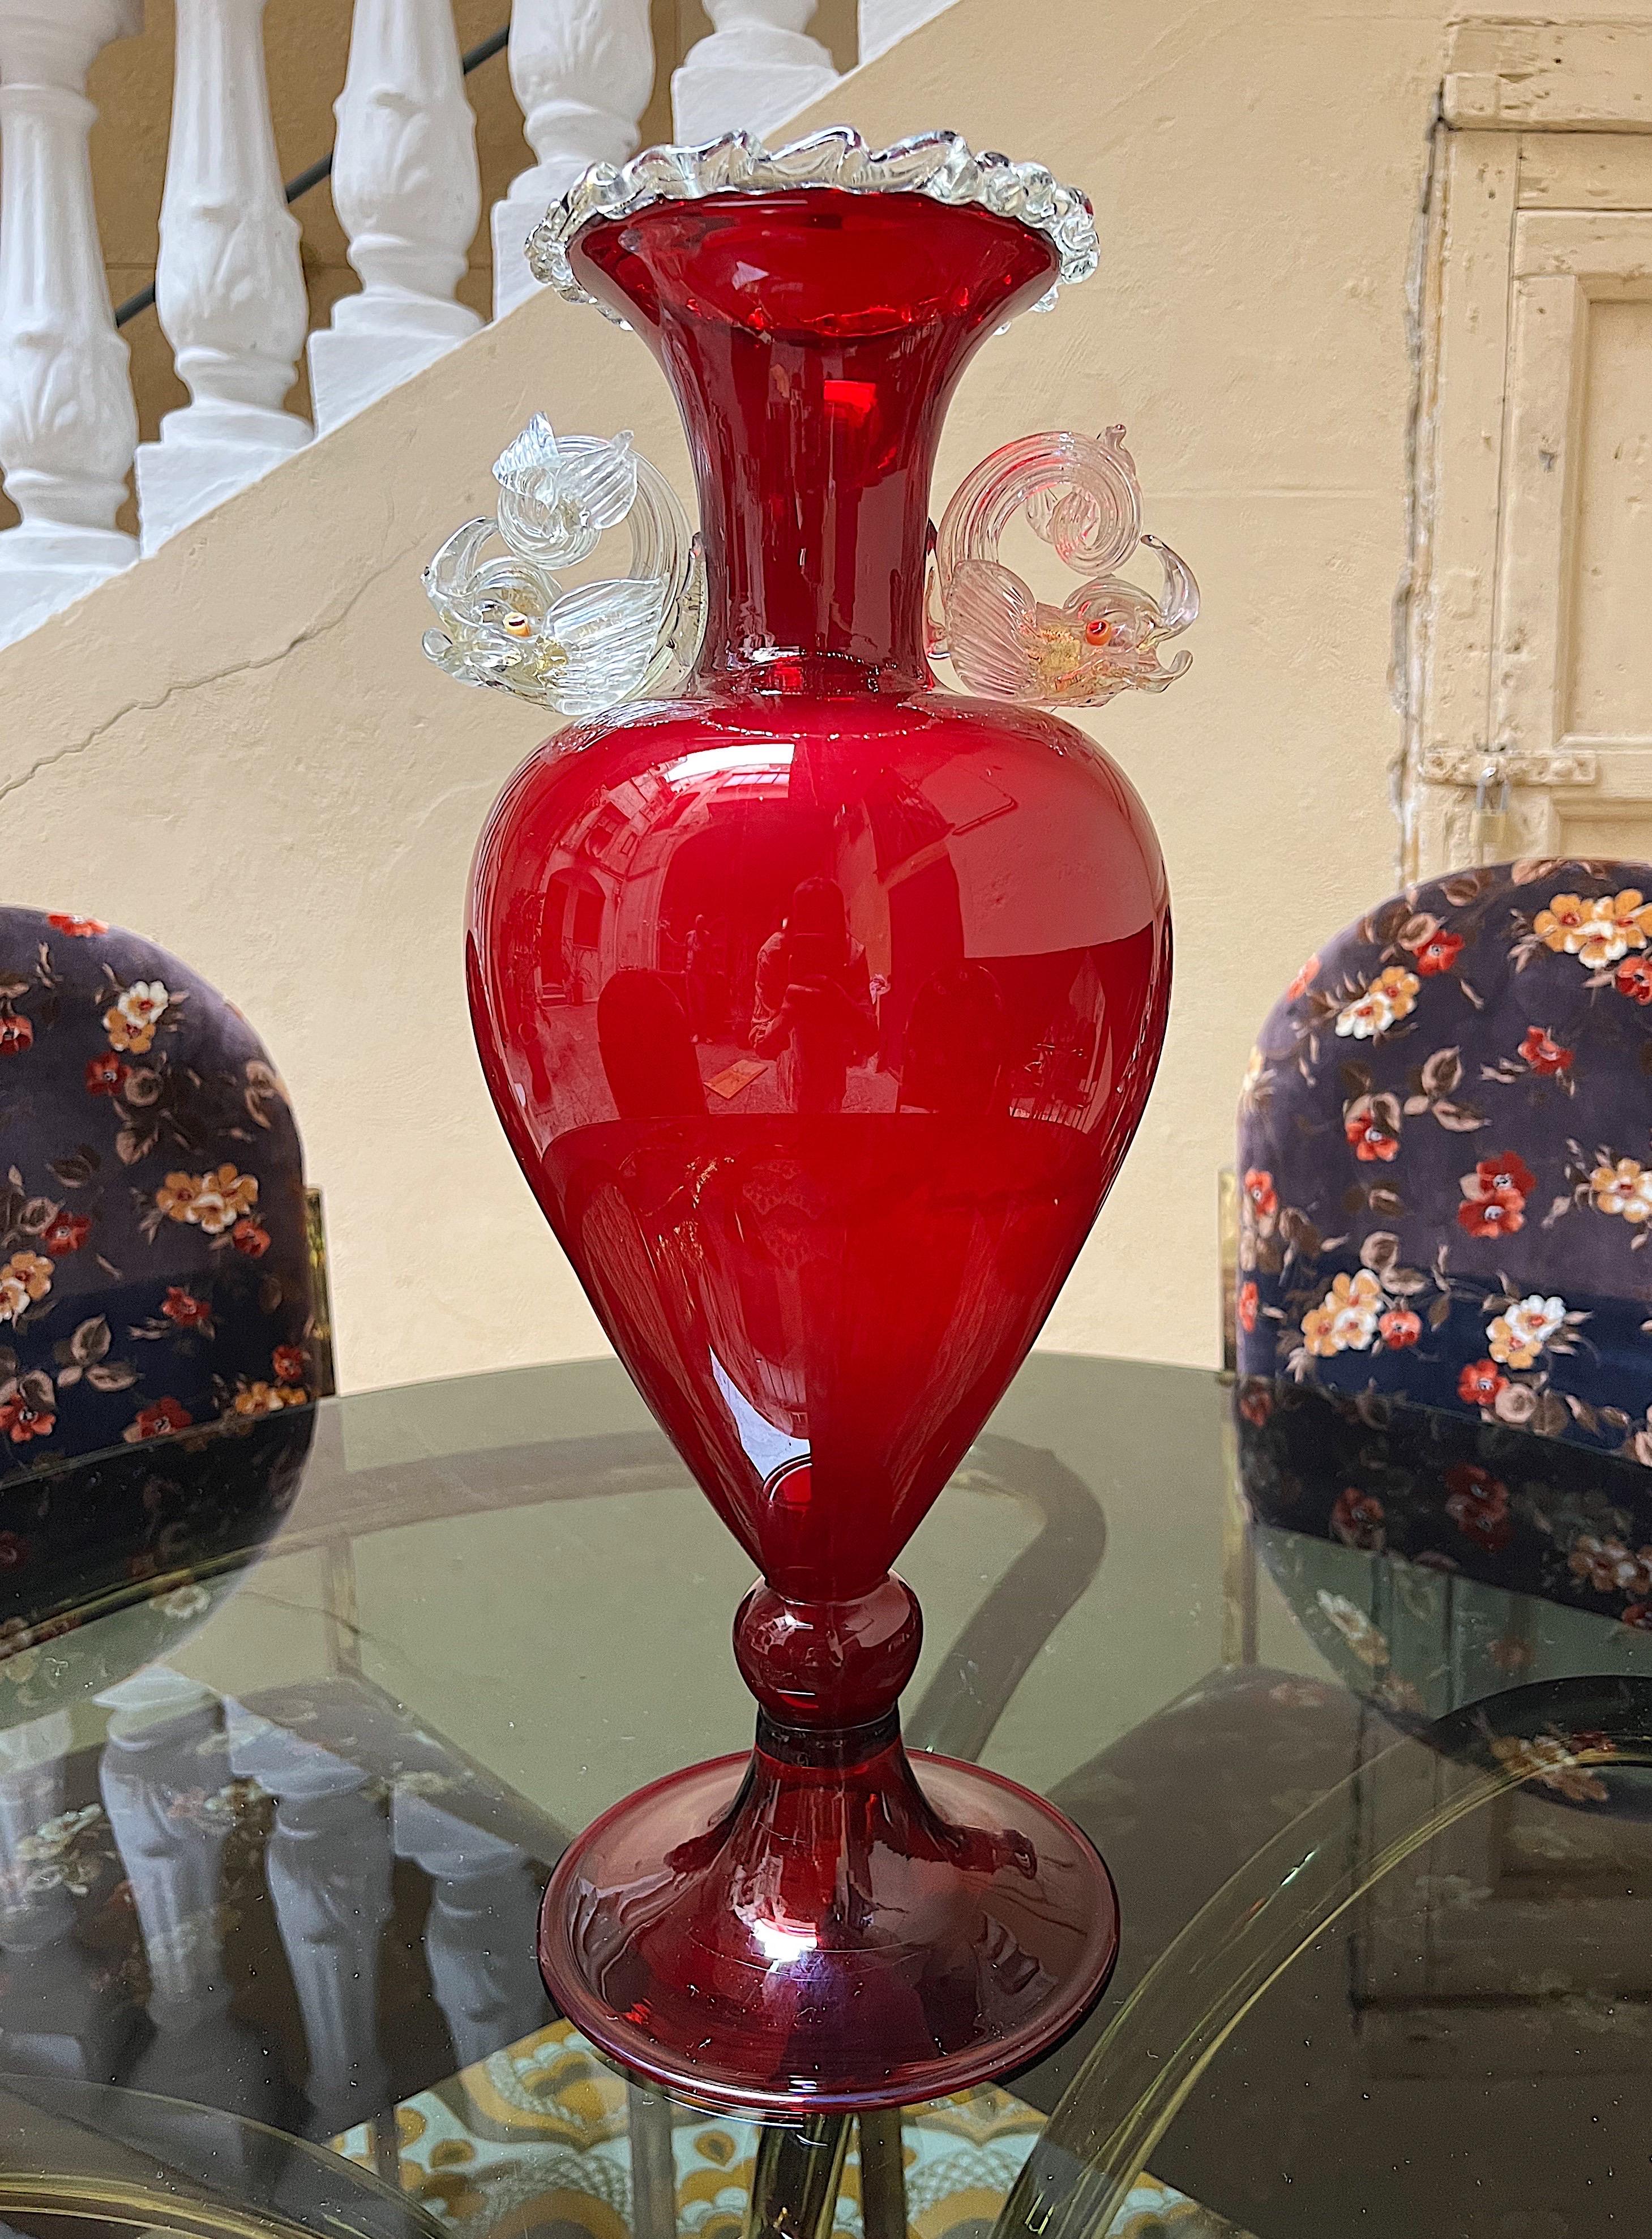 large glass vase for fish